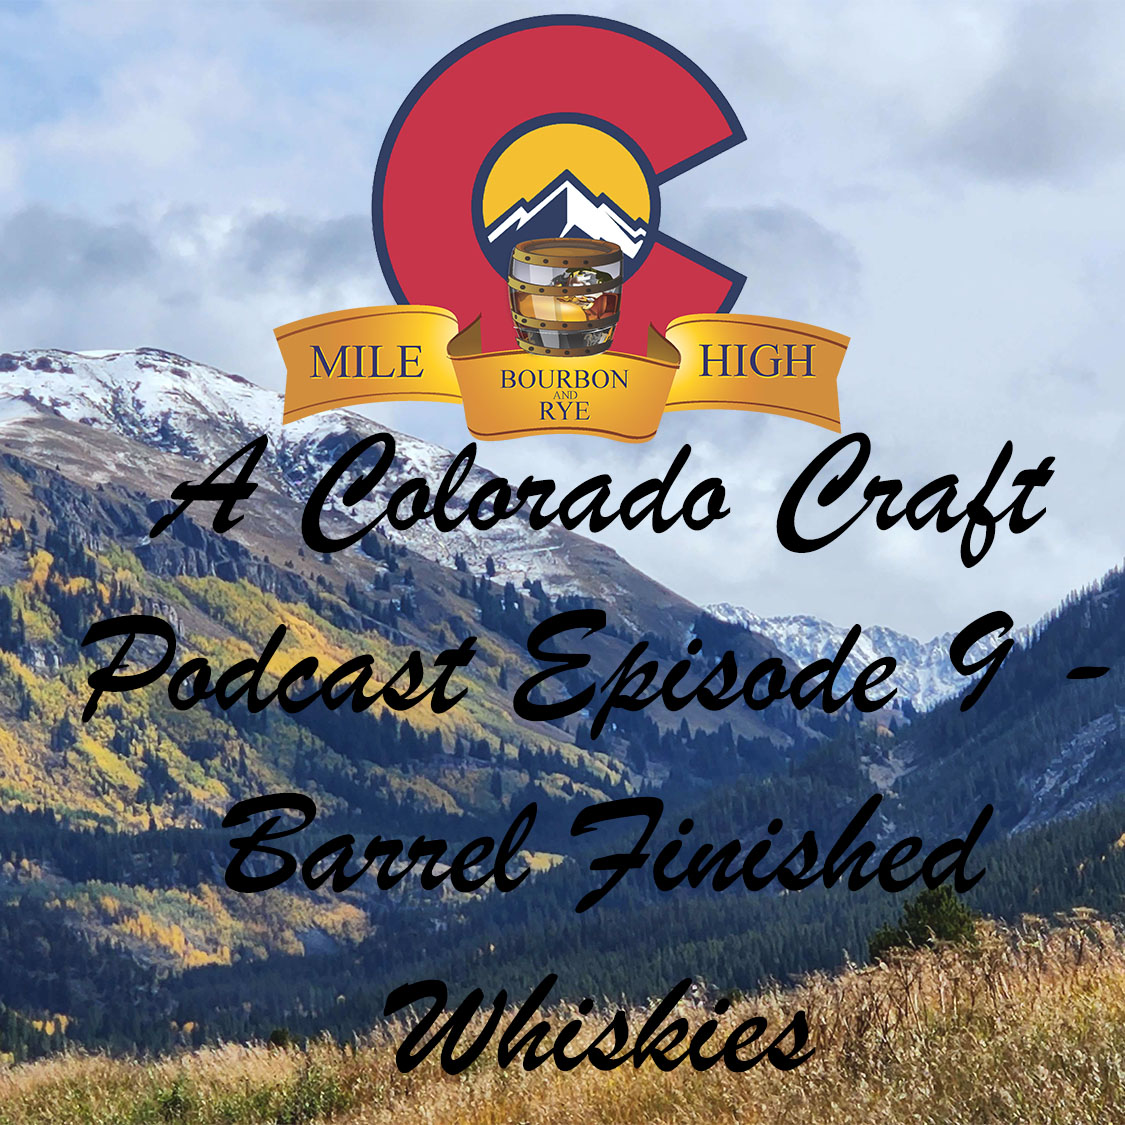 Read more about the article A Colorado Craft Podcast Episode 9 – Barrel Finished Whiskies